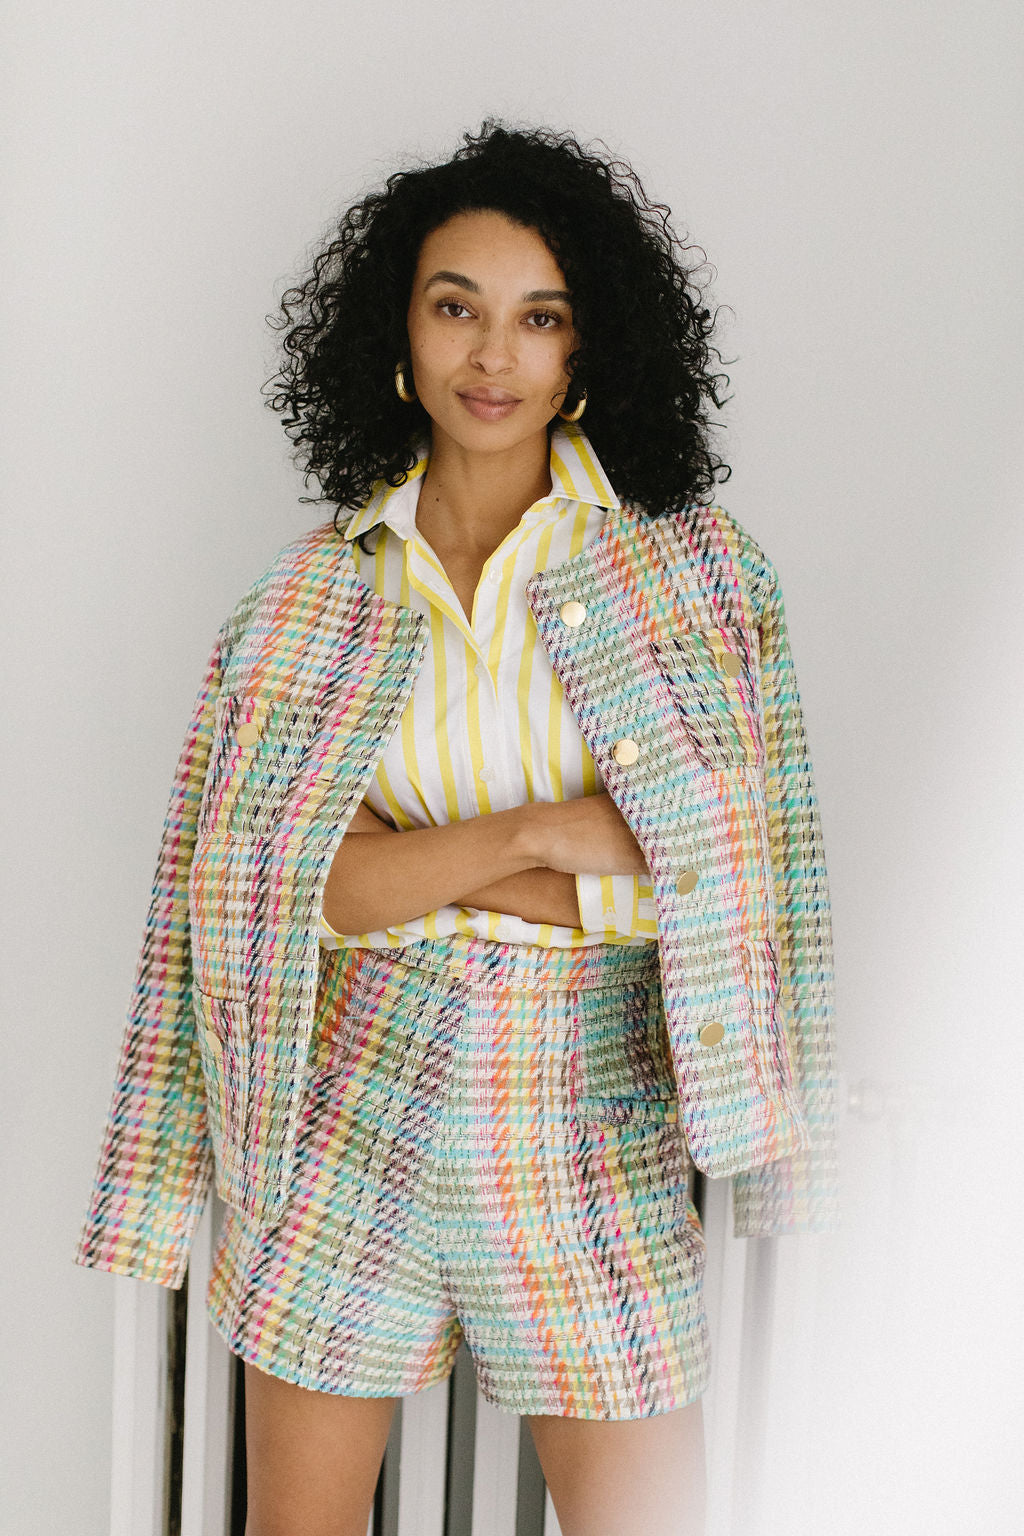 A woman with olive skin and short, black, curly hair staring directly at the camera with a small smile. She's wearing chunky gold hoop earrings, a white and yellow striped button down shirt pushed up to the elbows and a pair of colorful plaid shorts. She had her arms crossed around her waist and a matching colorful plaid jacket draped around her shoulders.